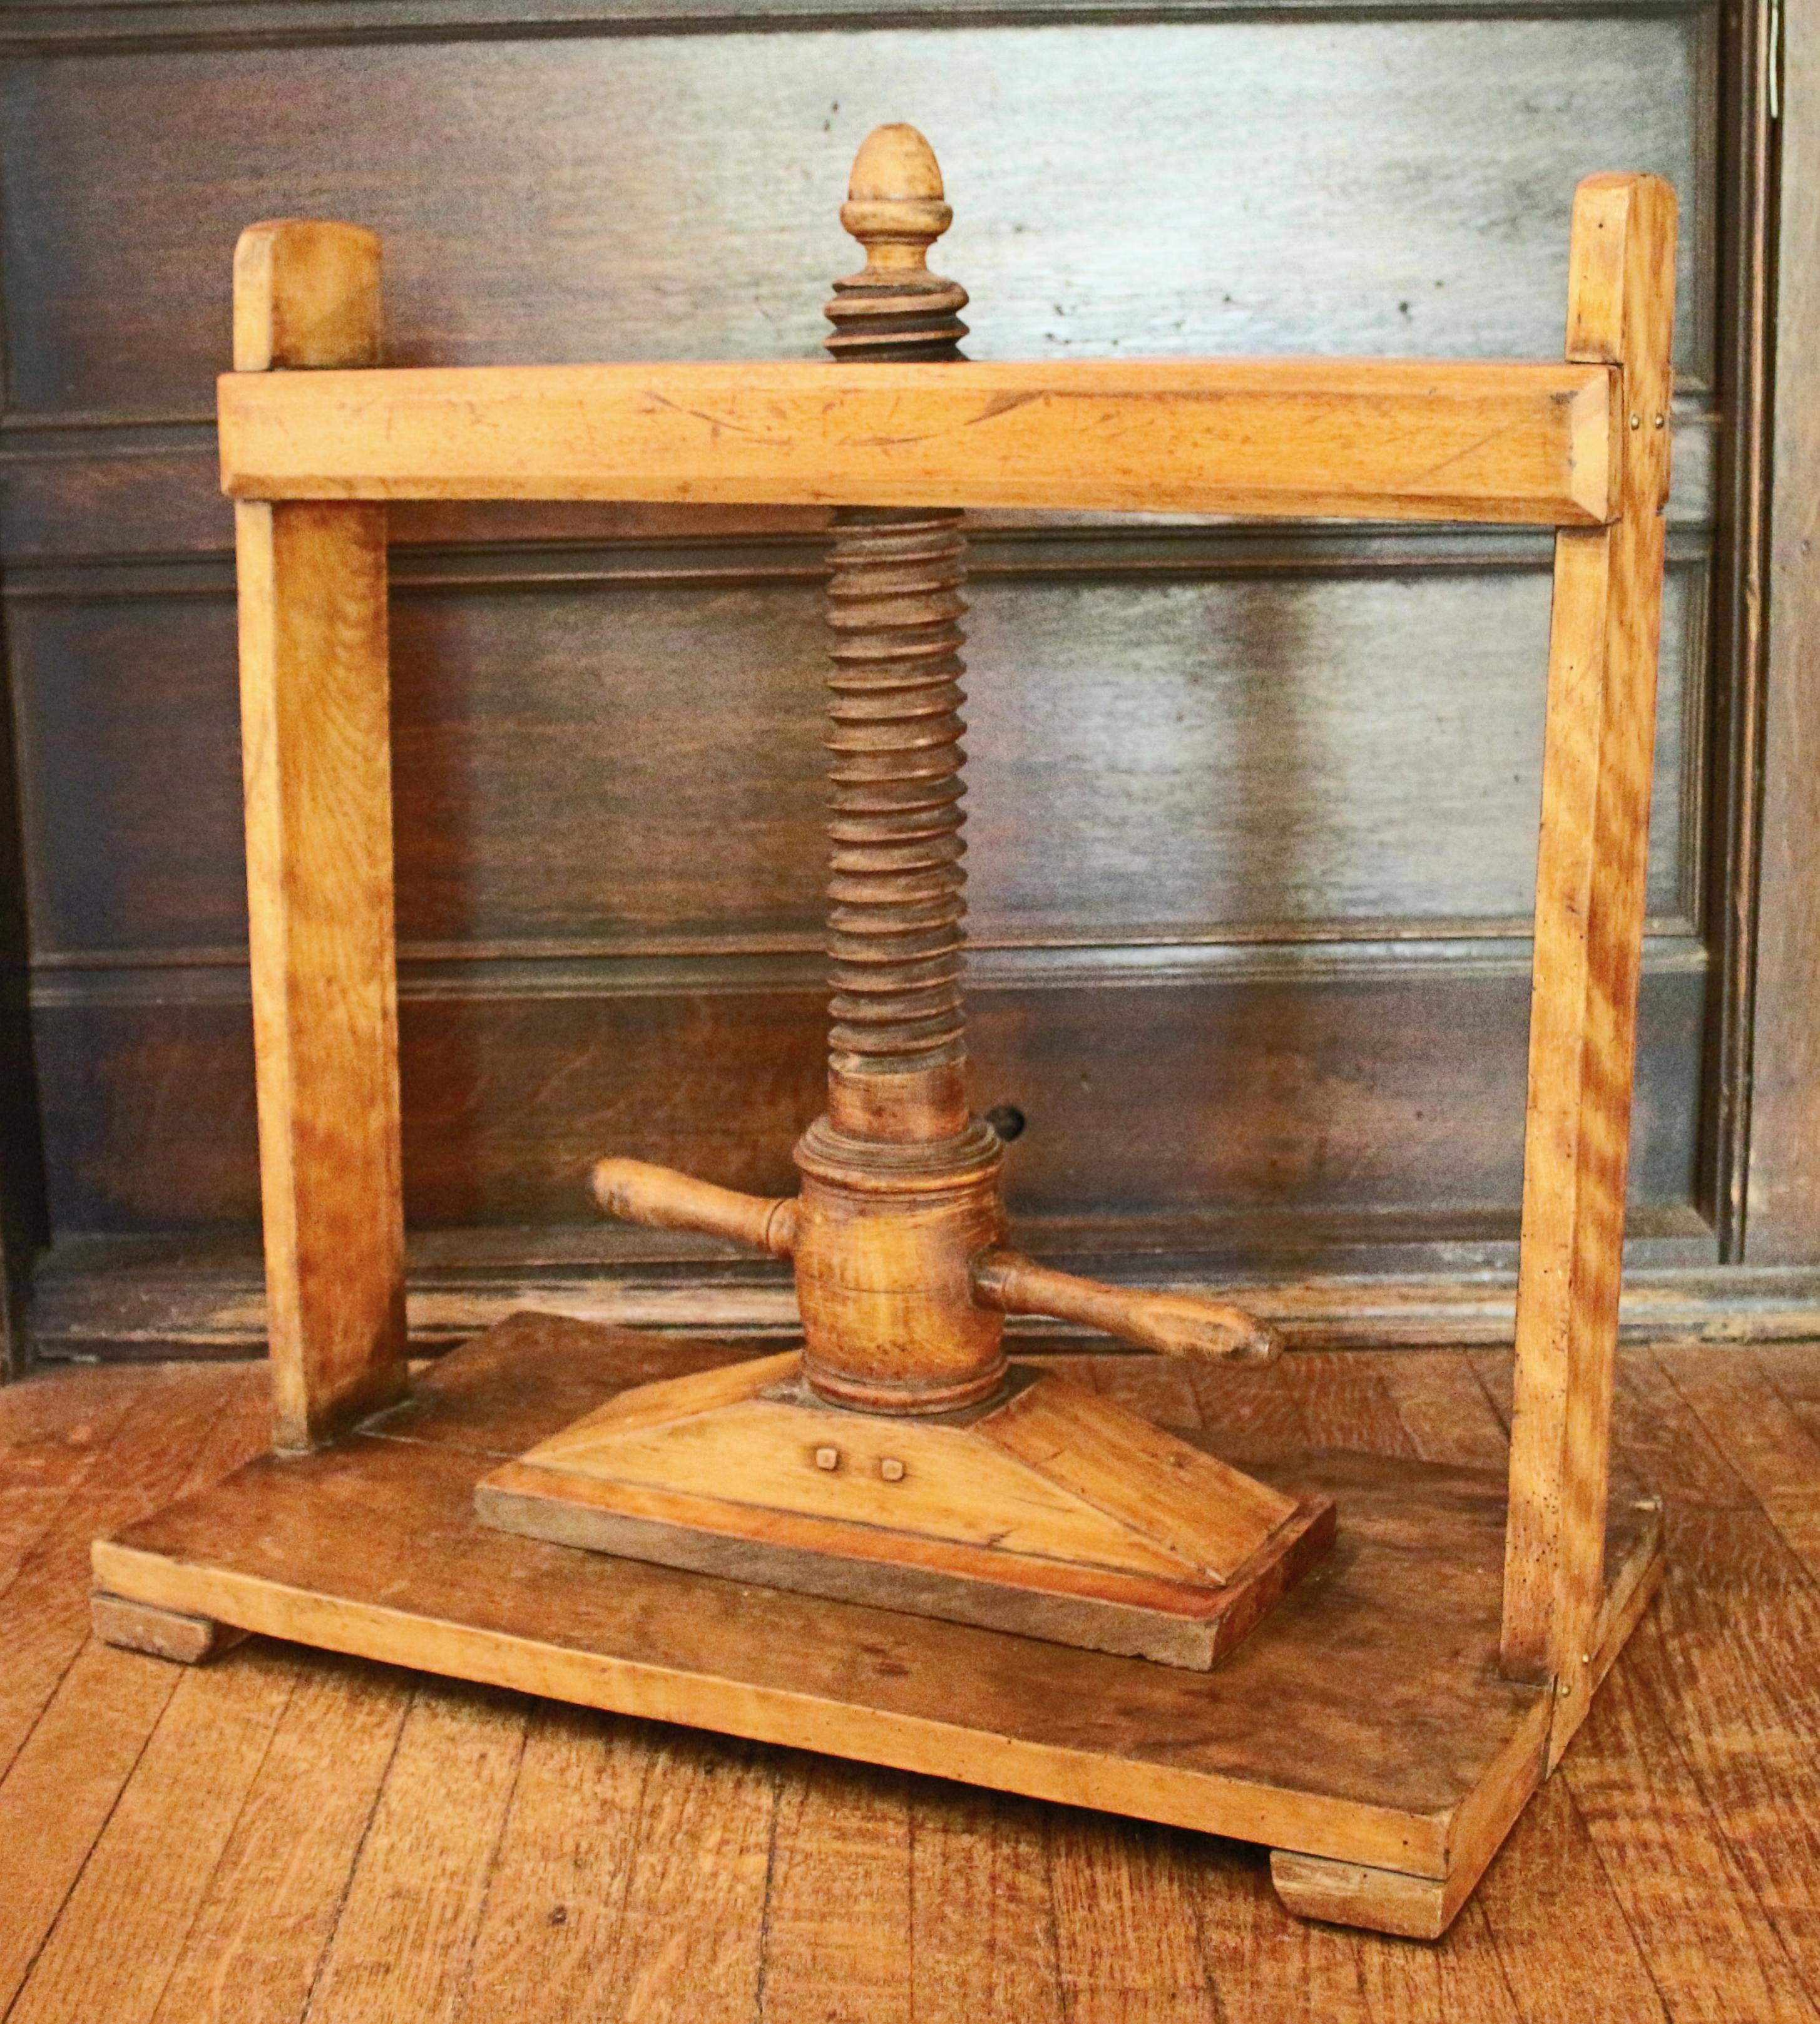 An oversized book press, 19th century, of maple. Probably American, possibly European. Good overall condition, slight warp and split in the base, wear commensurate with age and use. Bracket feet. Acorn finial shaft tip. Measures: 24